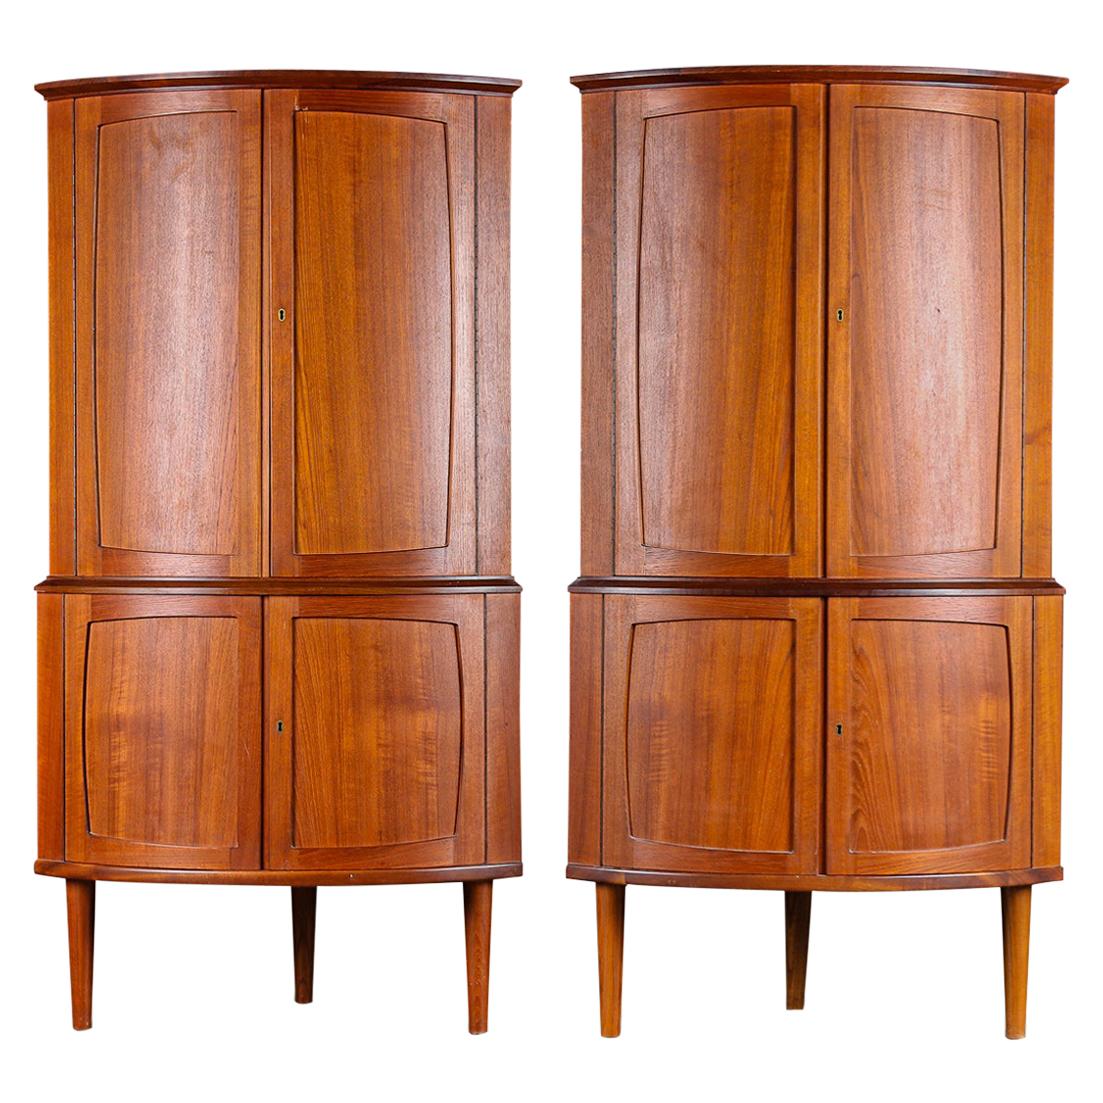 Pair of Bow Front Teak Corner Cabinets